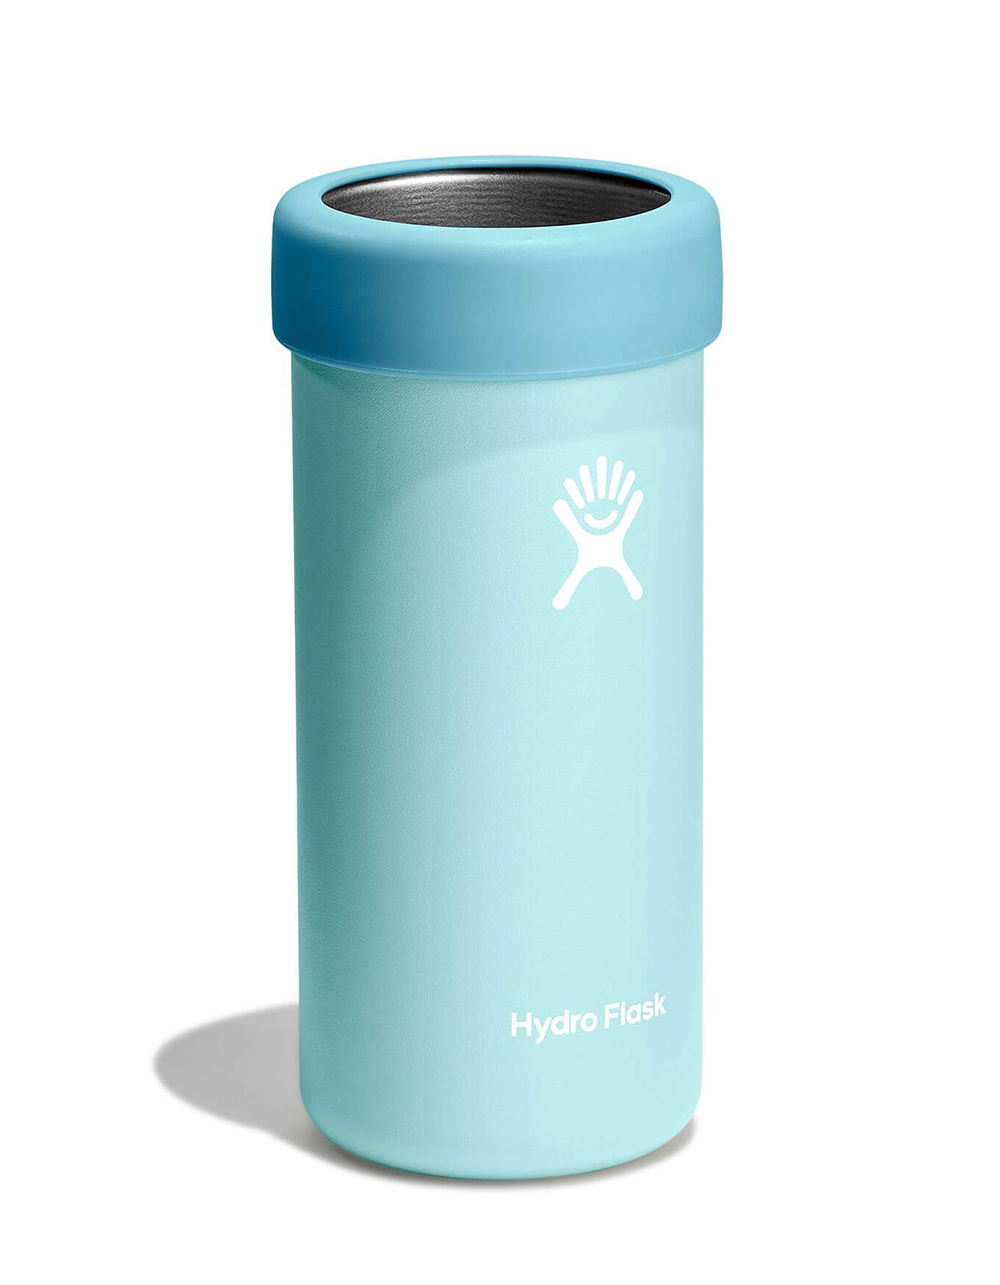 HYDRO FLASK 32 oz Wide Mouth Water Bottle with Flex Chug Cap - AGAVE, Tillys, Salesforce Commerce Cloud